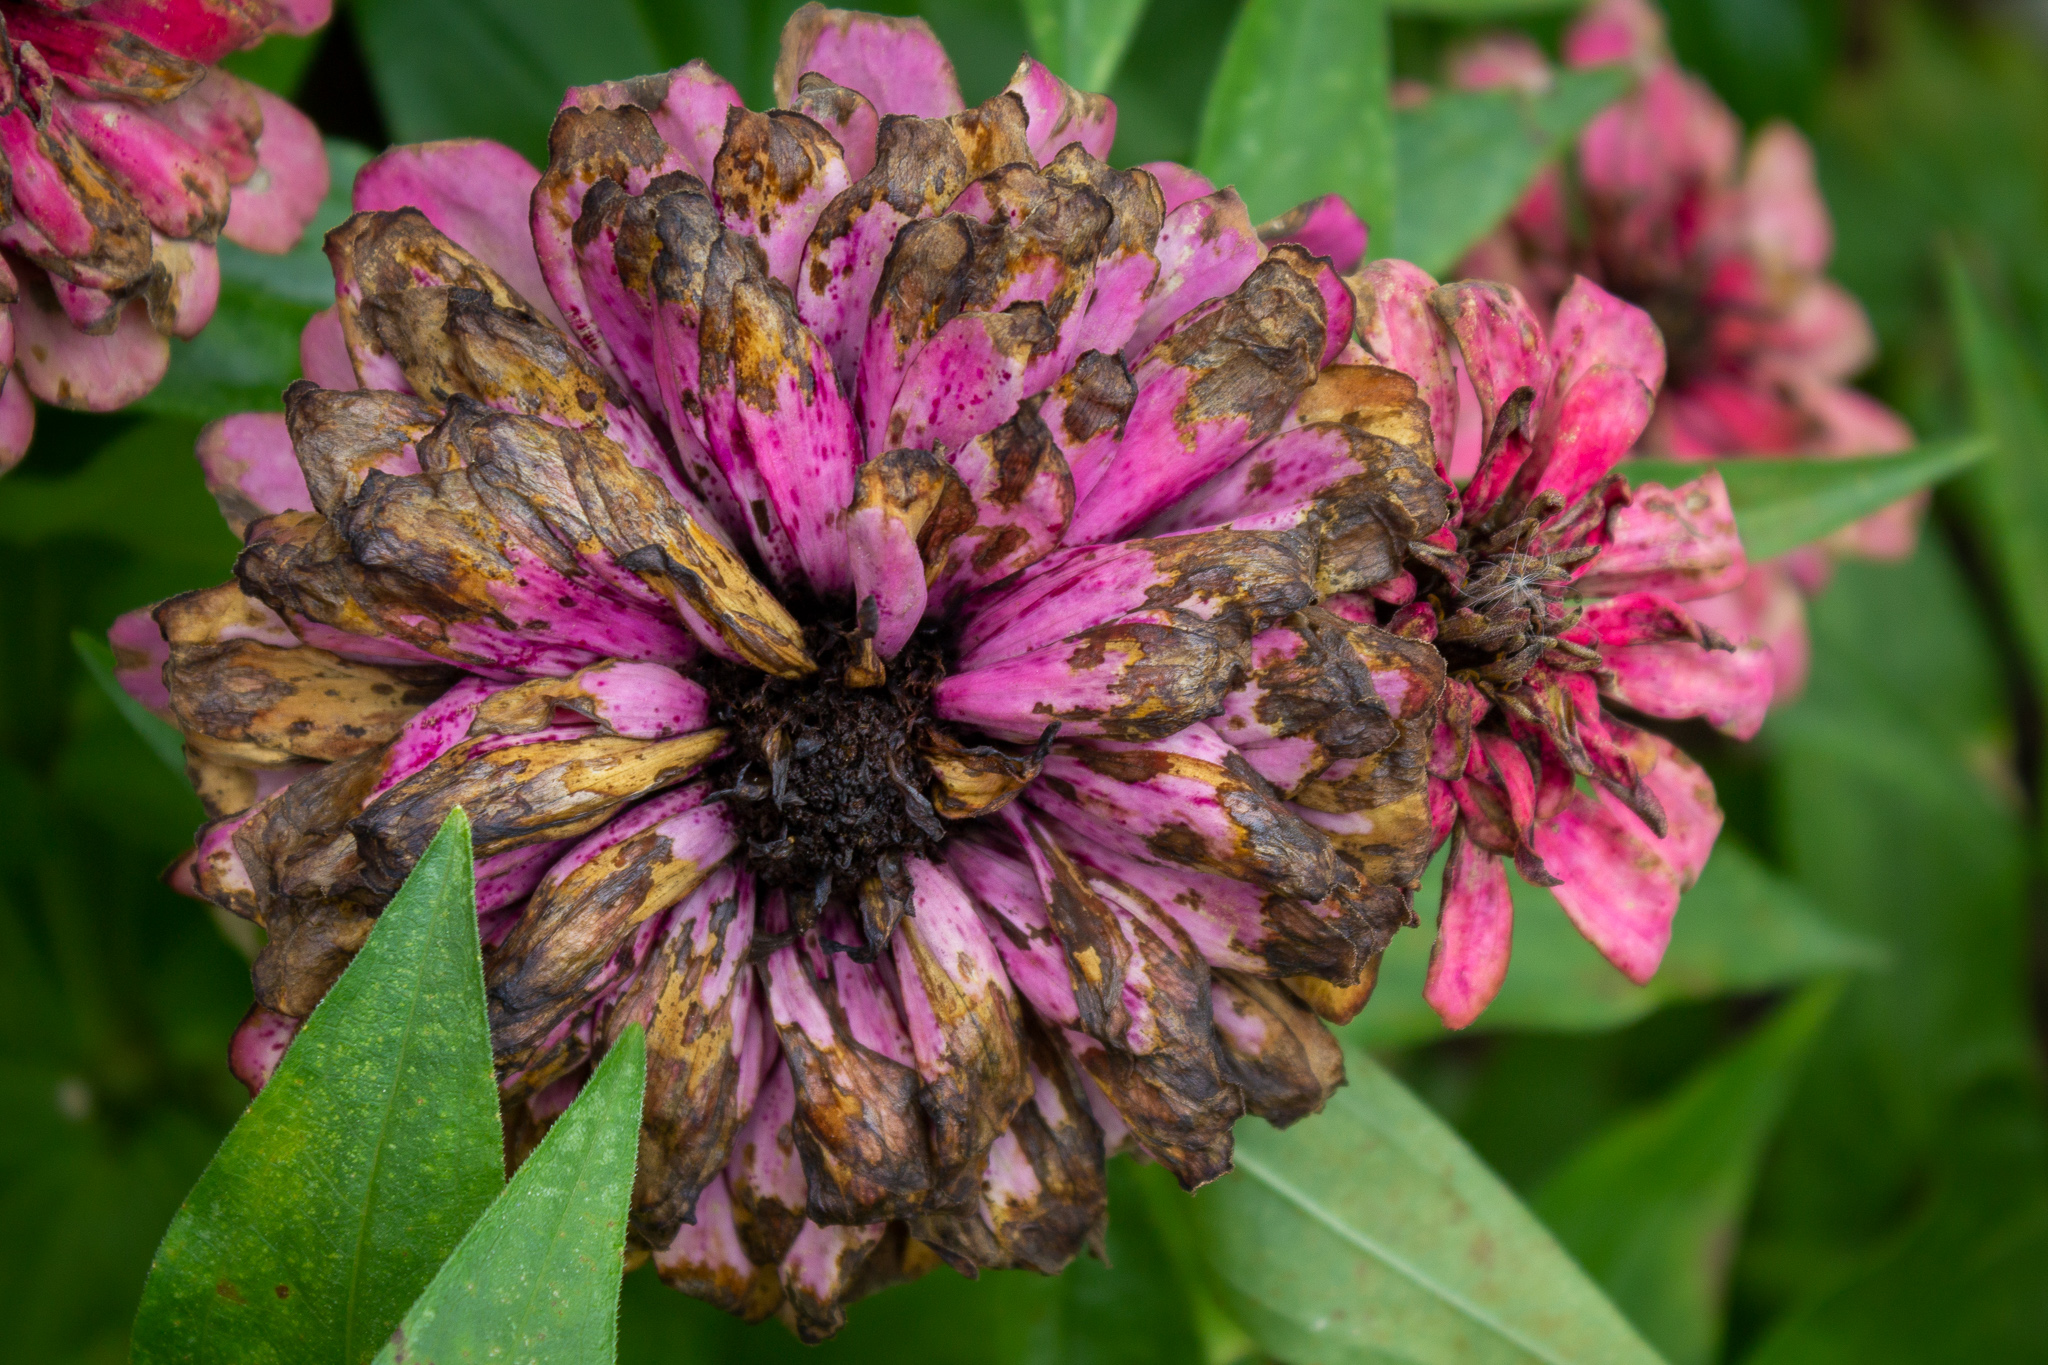 Closeup on a round pink flower with rotting petals